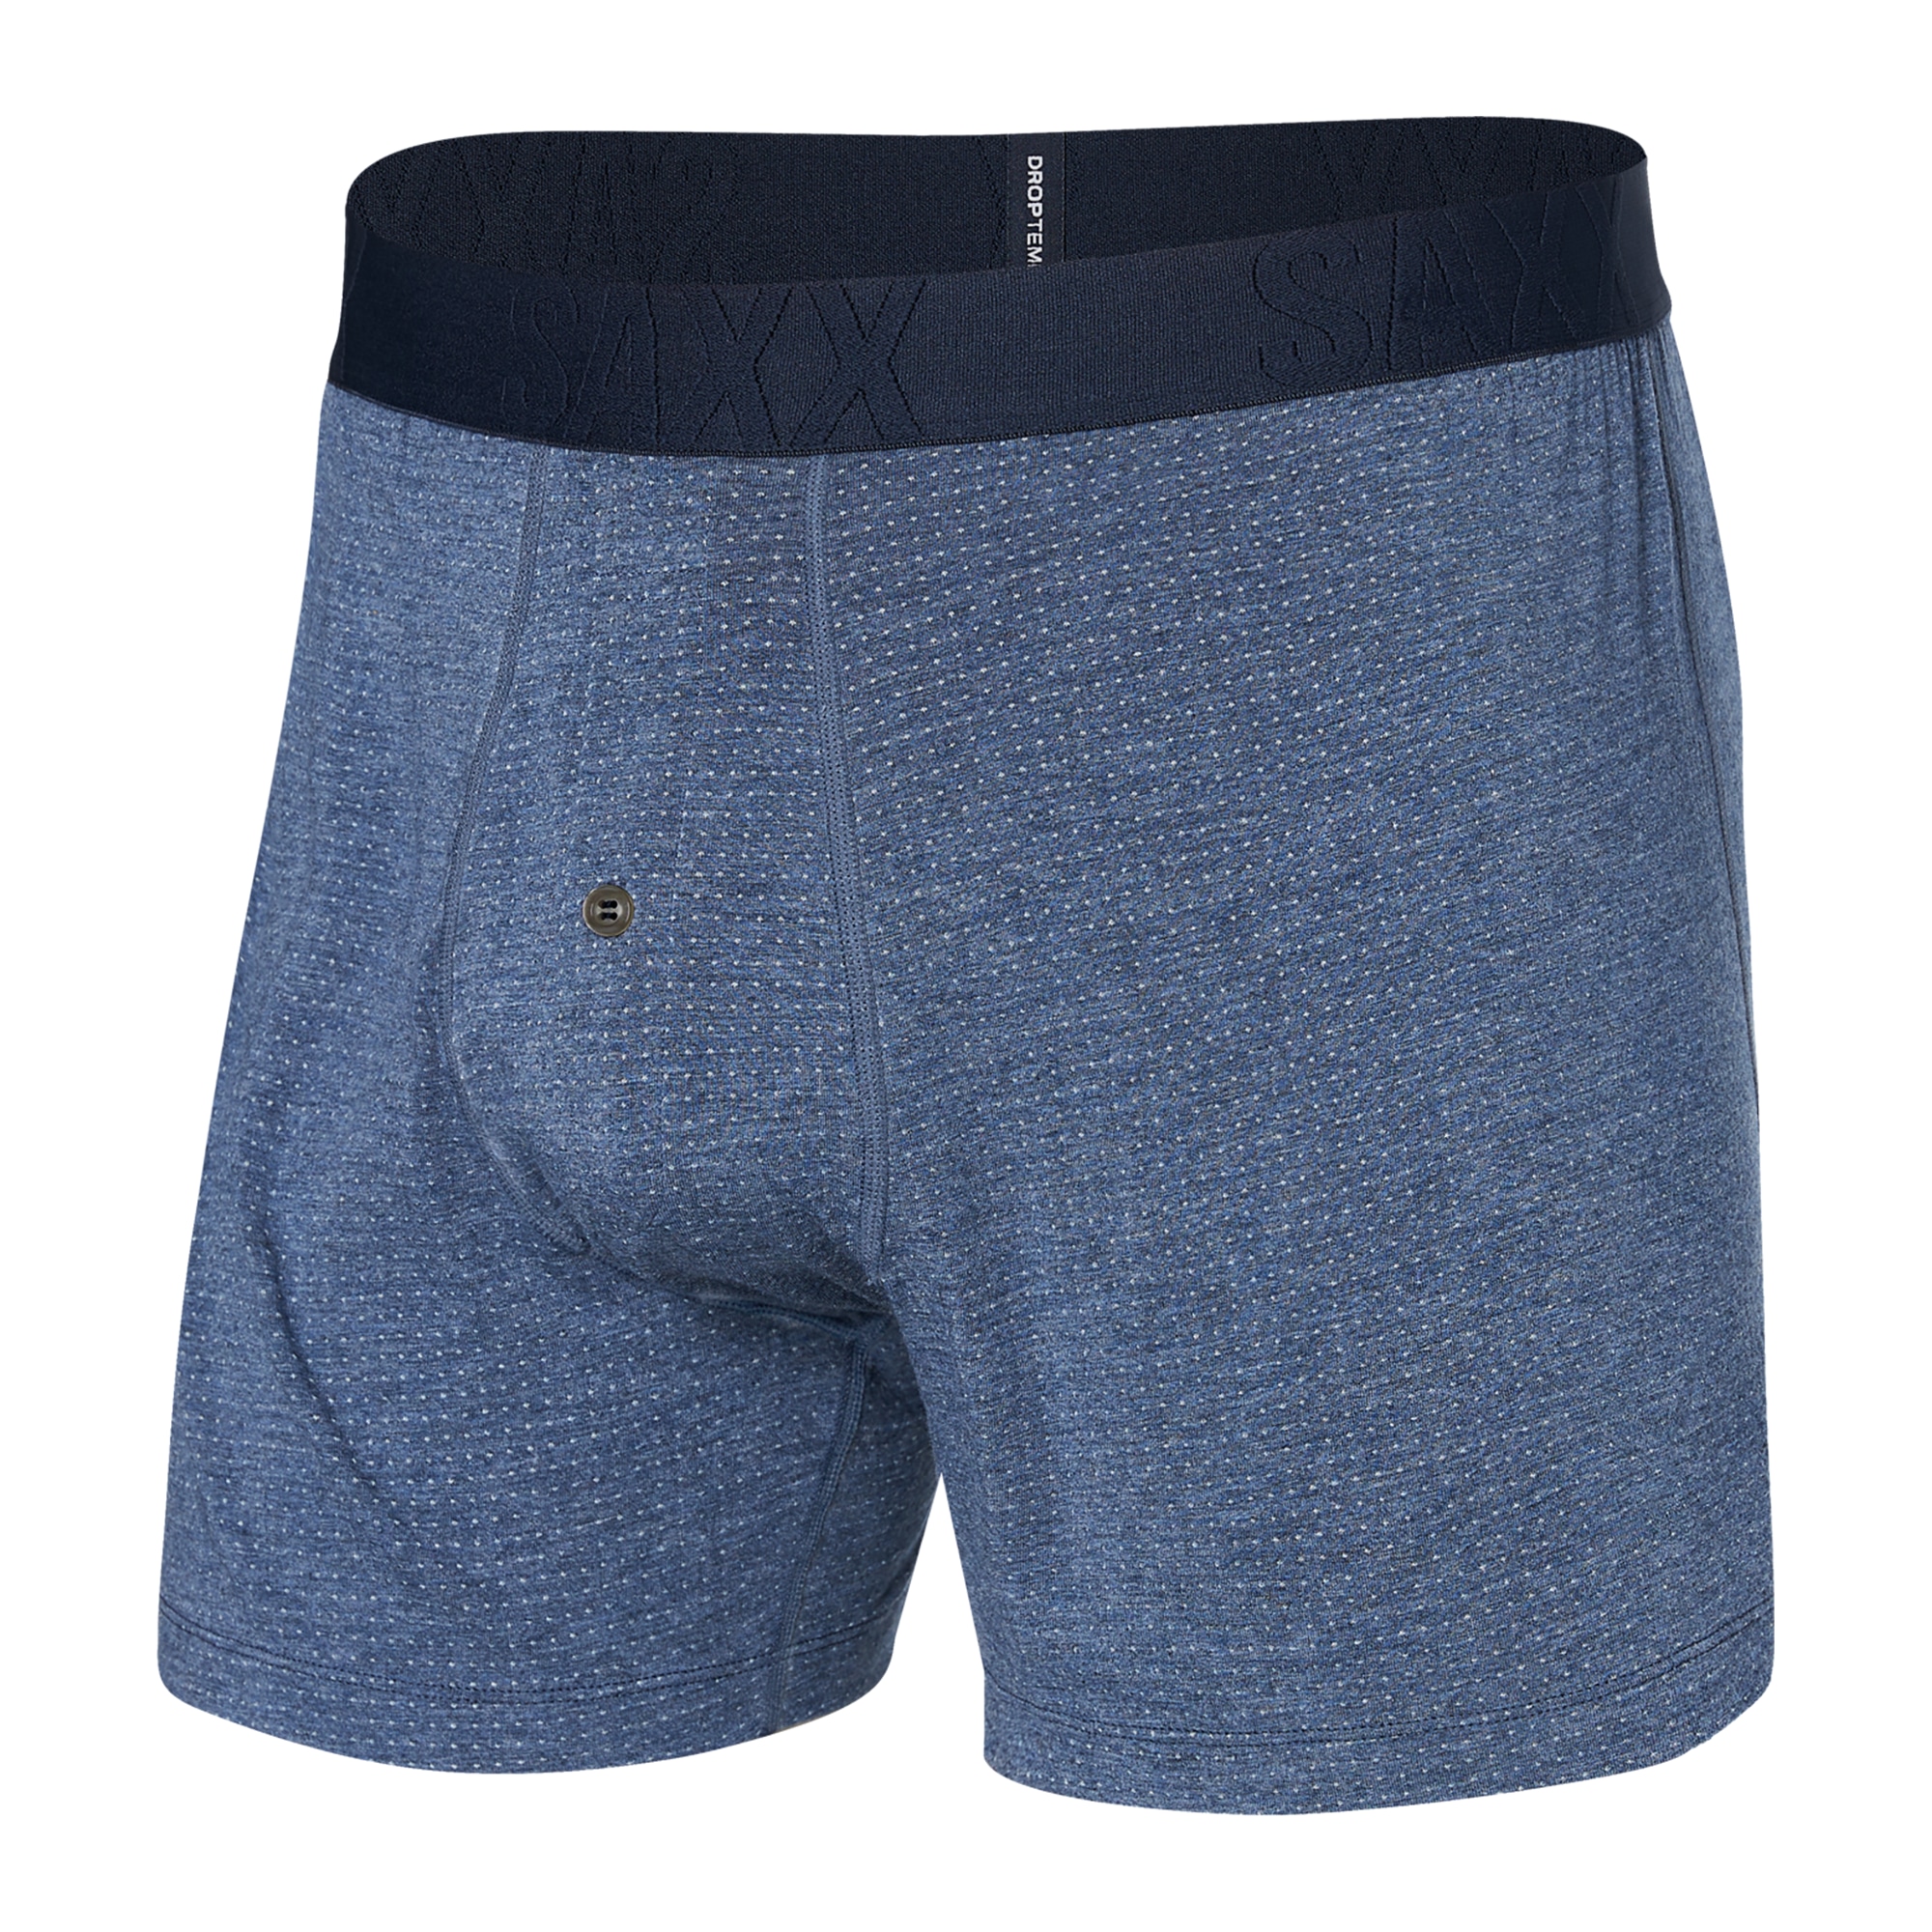 Men's DropTemp Cooling Sleep Loose Fit Boxer With Fly